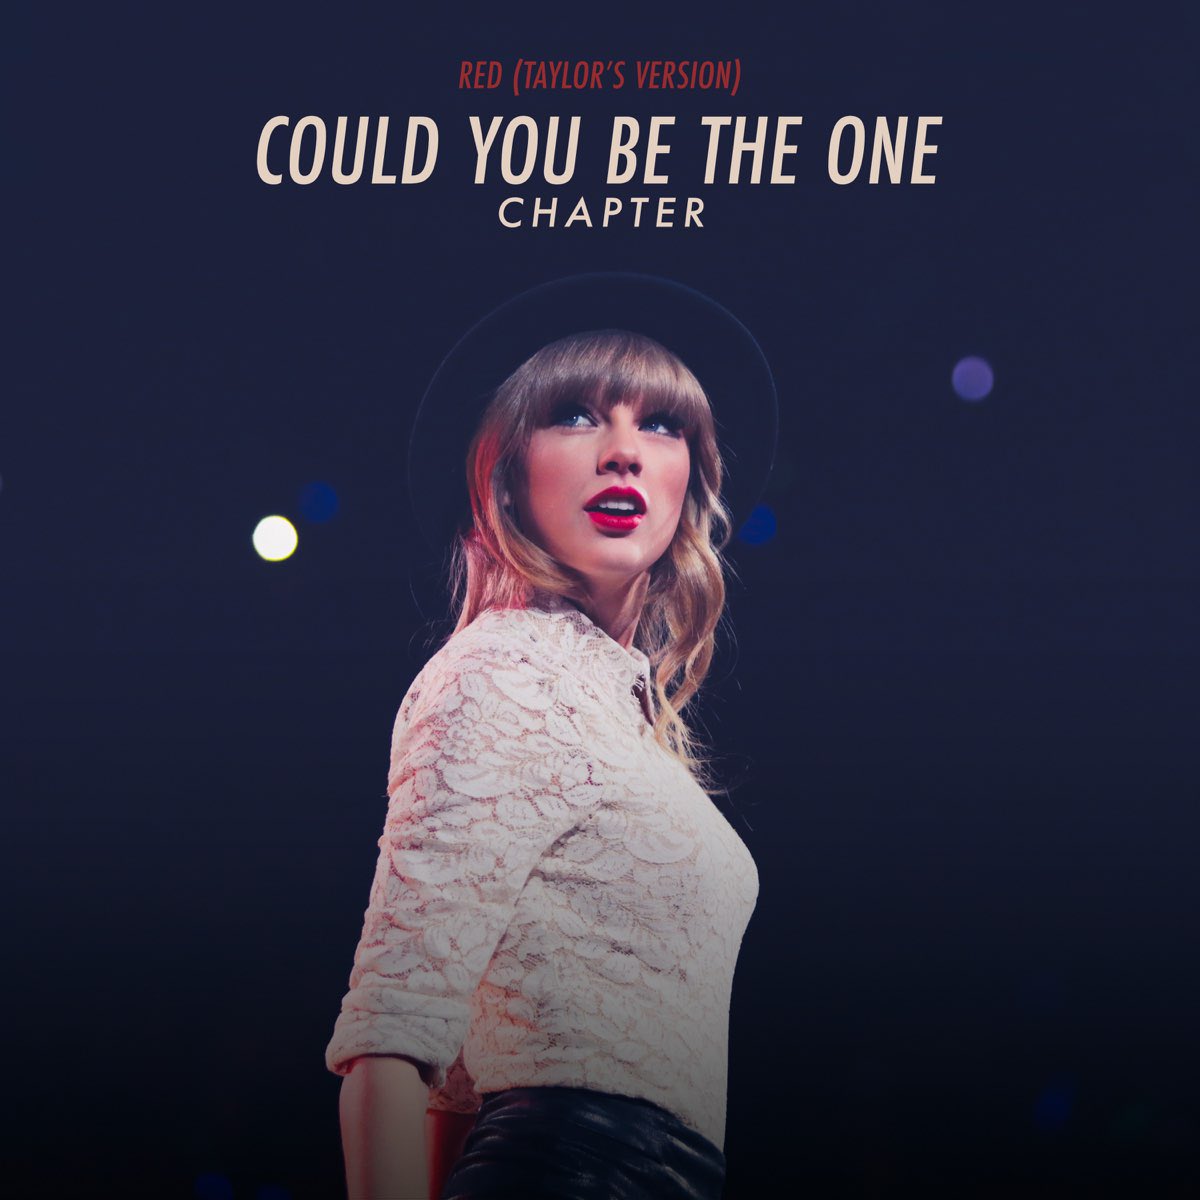 RED (Taylor's Version): Could You Be The One Chapter